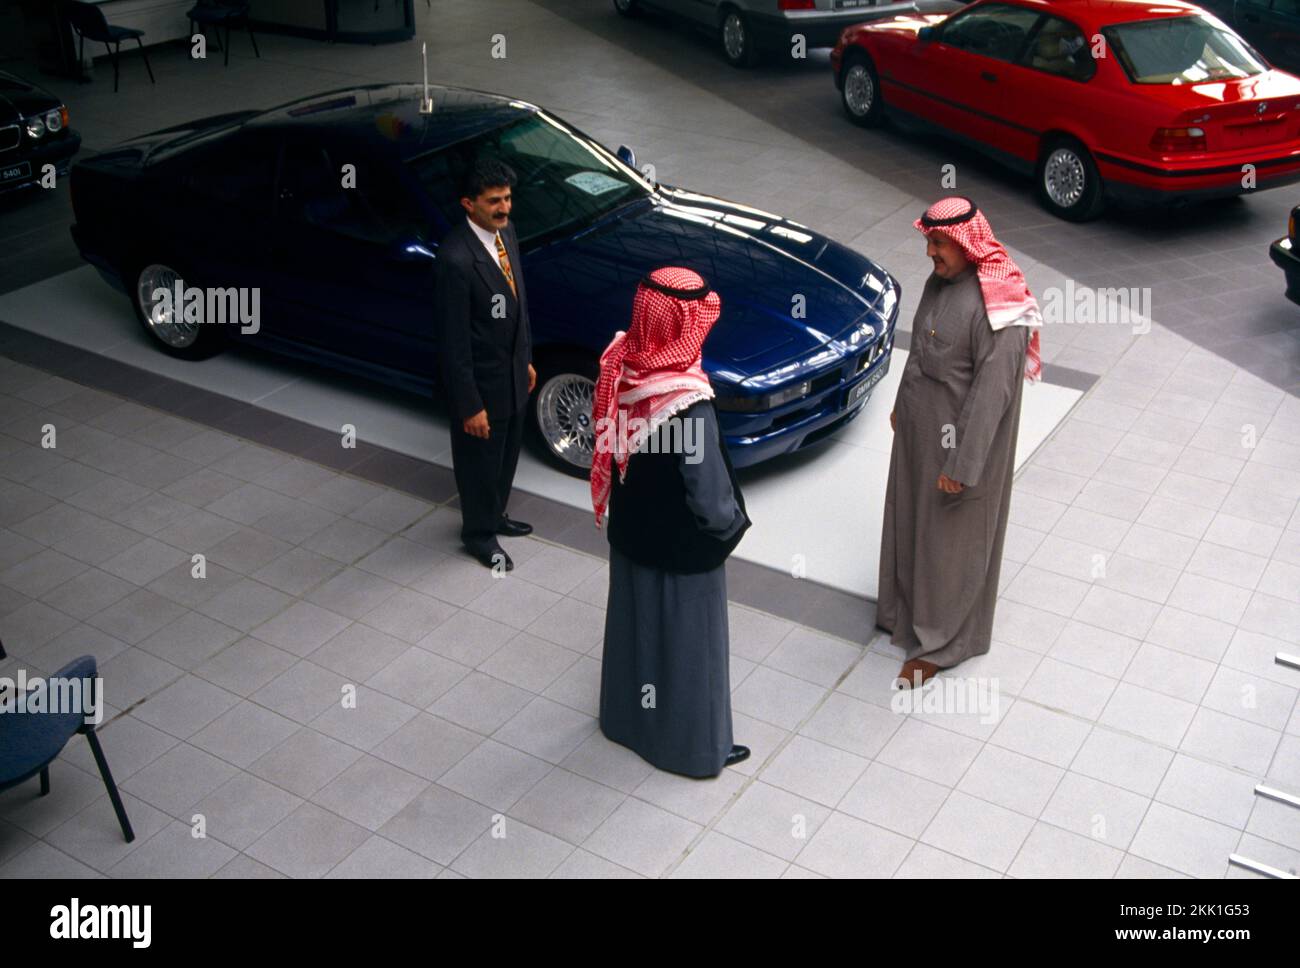 Kuwait City Kuwait Men Looking at Cars in BMW Showroom Stock Photo